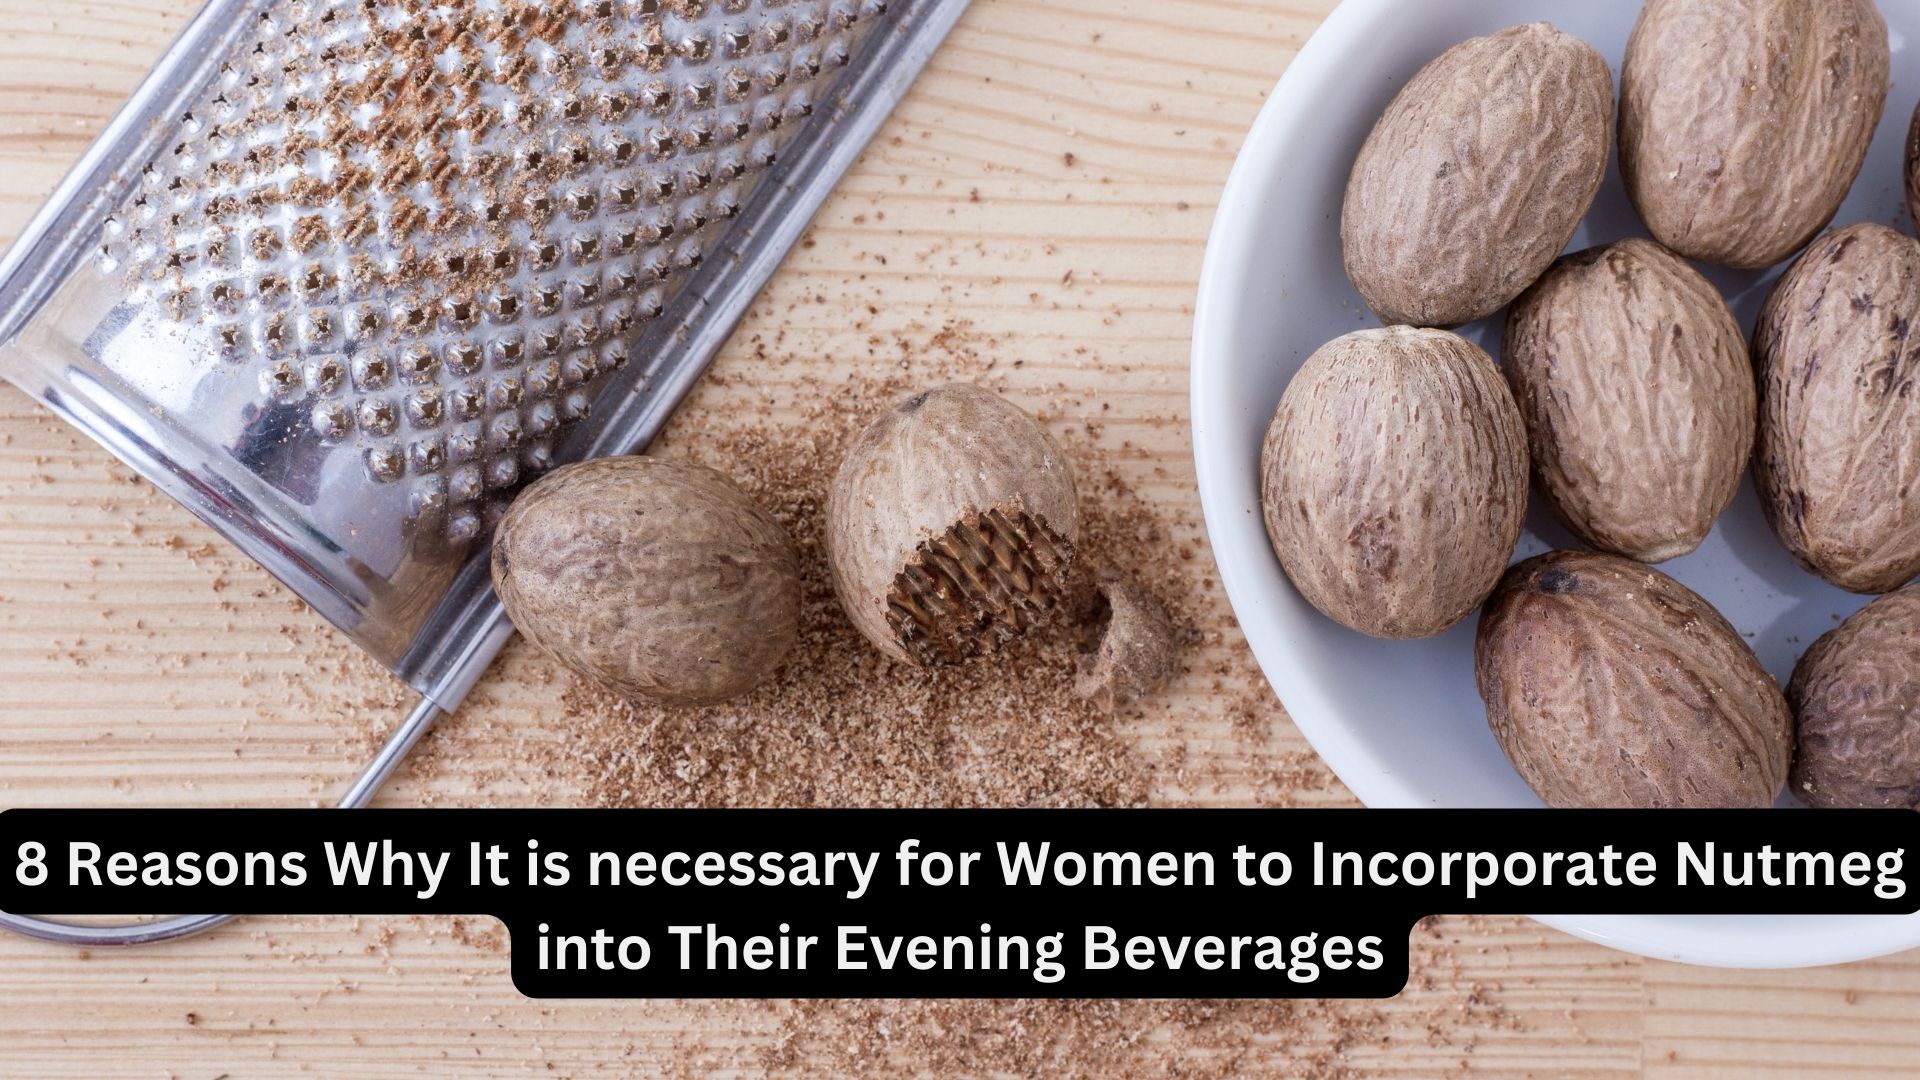 8 Reasons Why It is necessary for Women to Incorporate Nutmeg into Their Evening Beverages